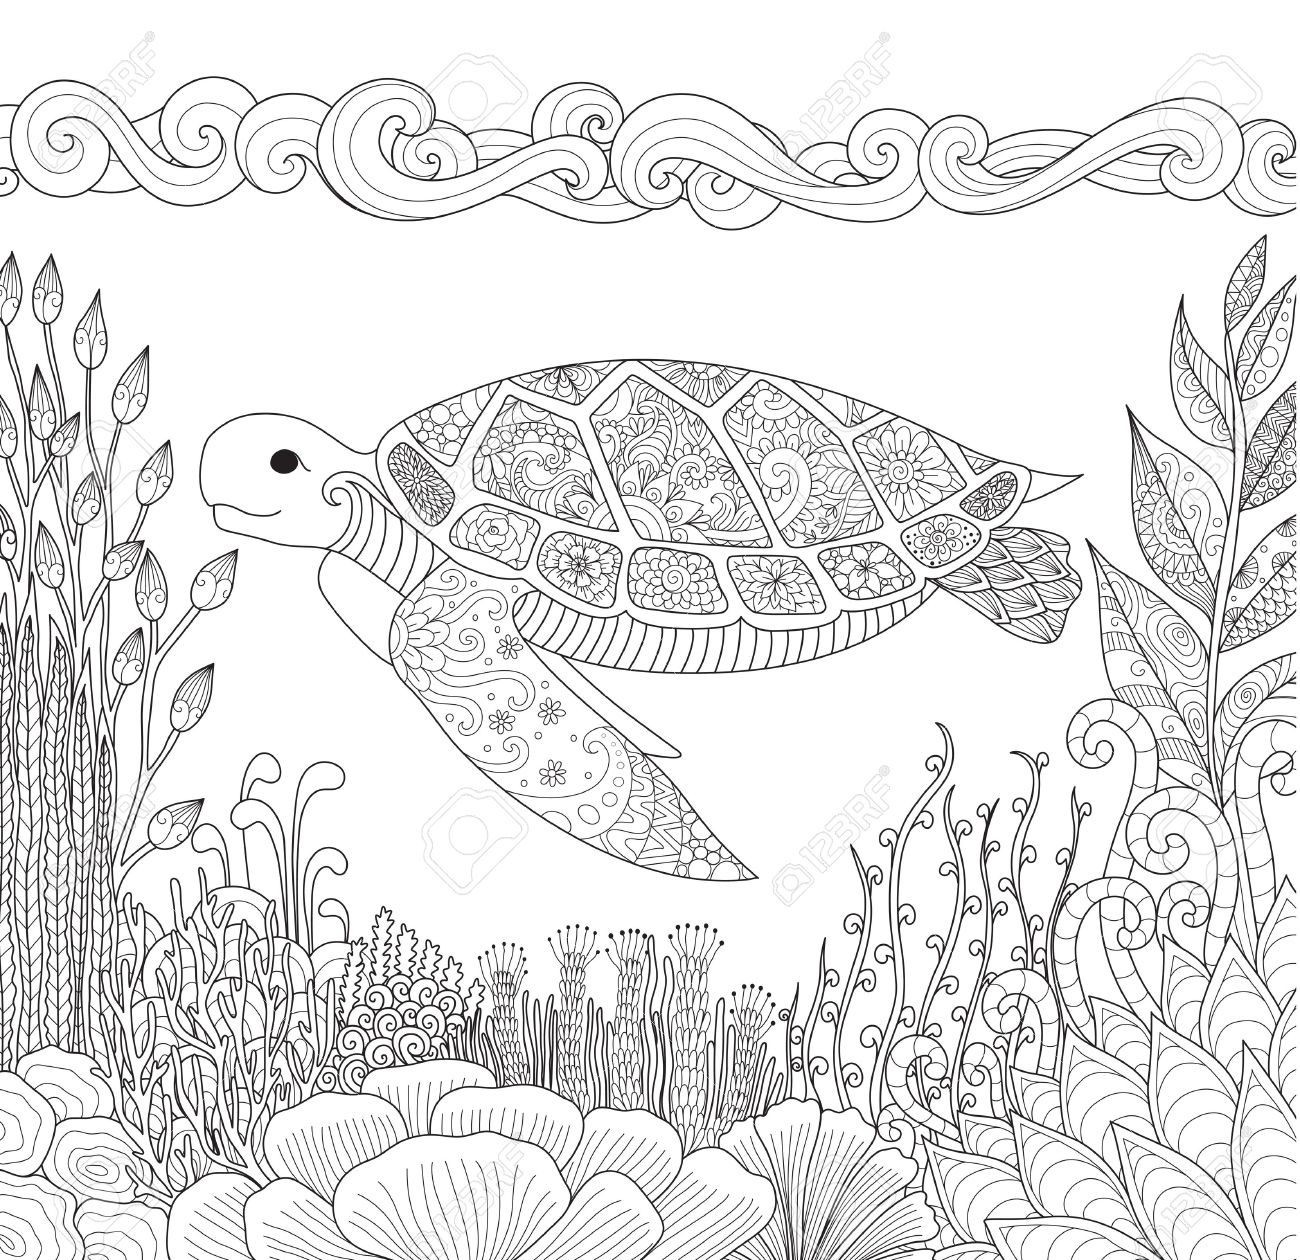 Zendoodle design of turtle swimming in ocean and beautiful corals for adult coloring book for anti stress